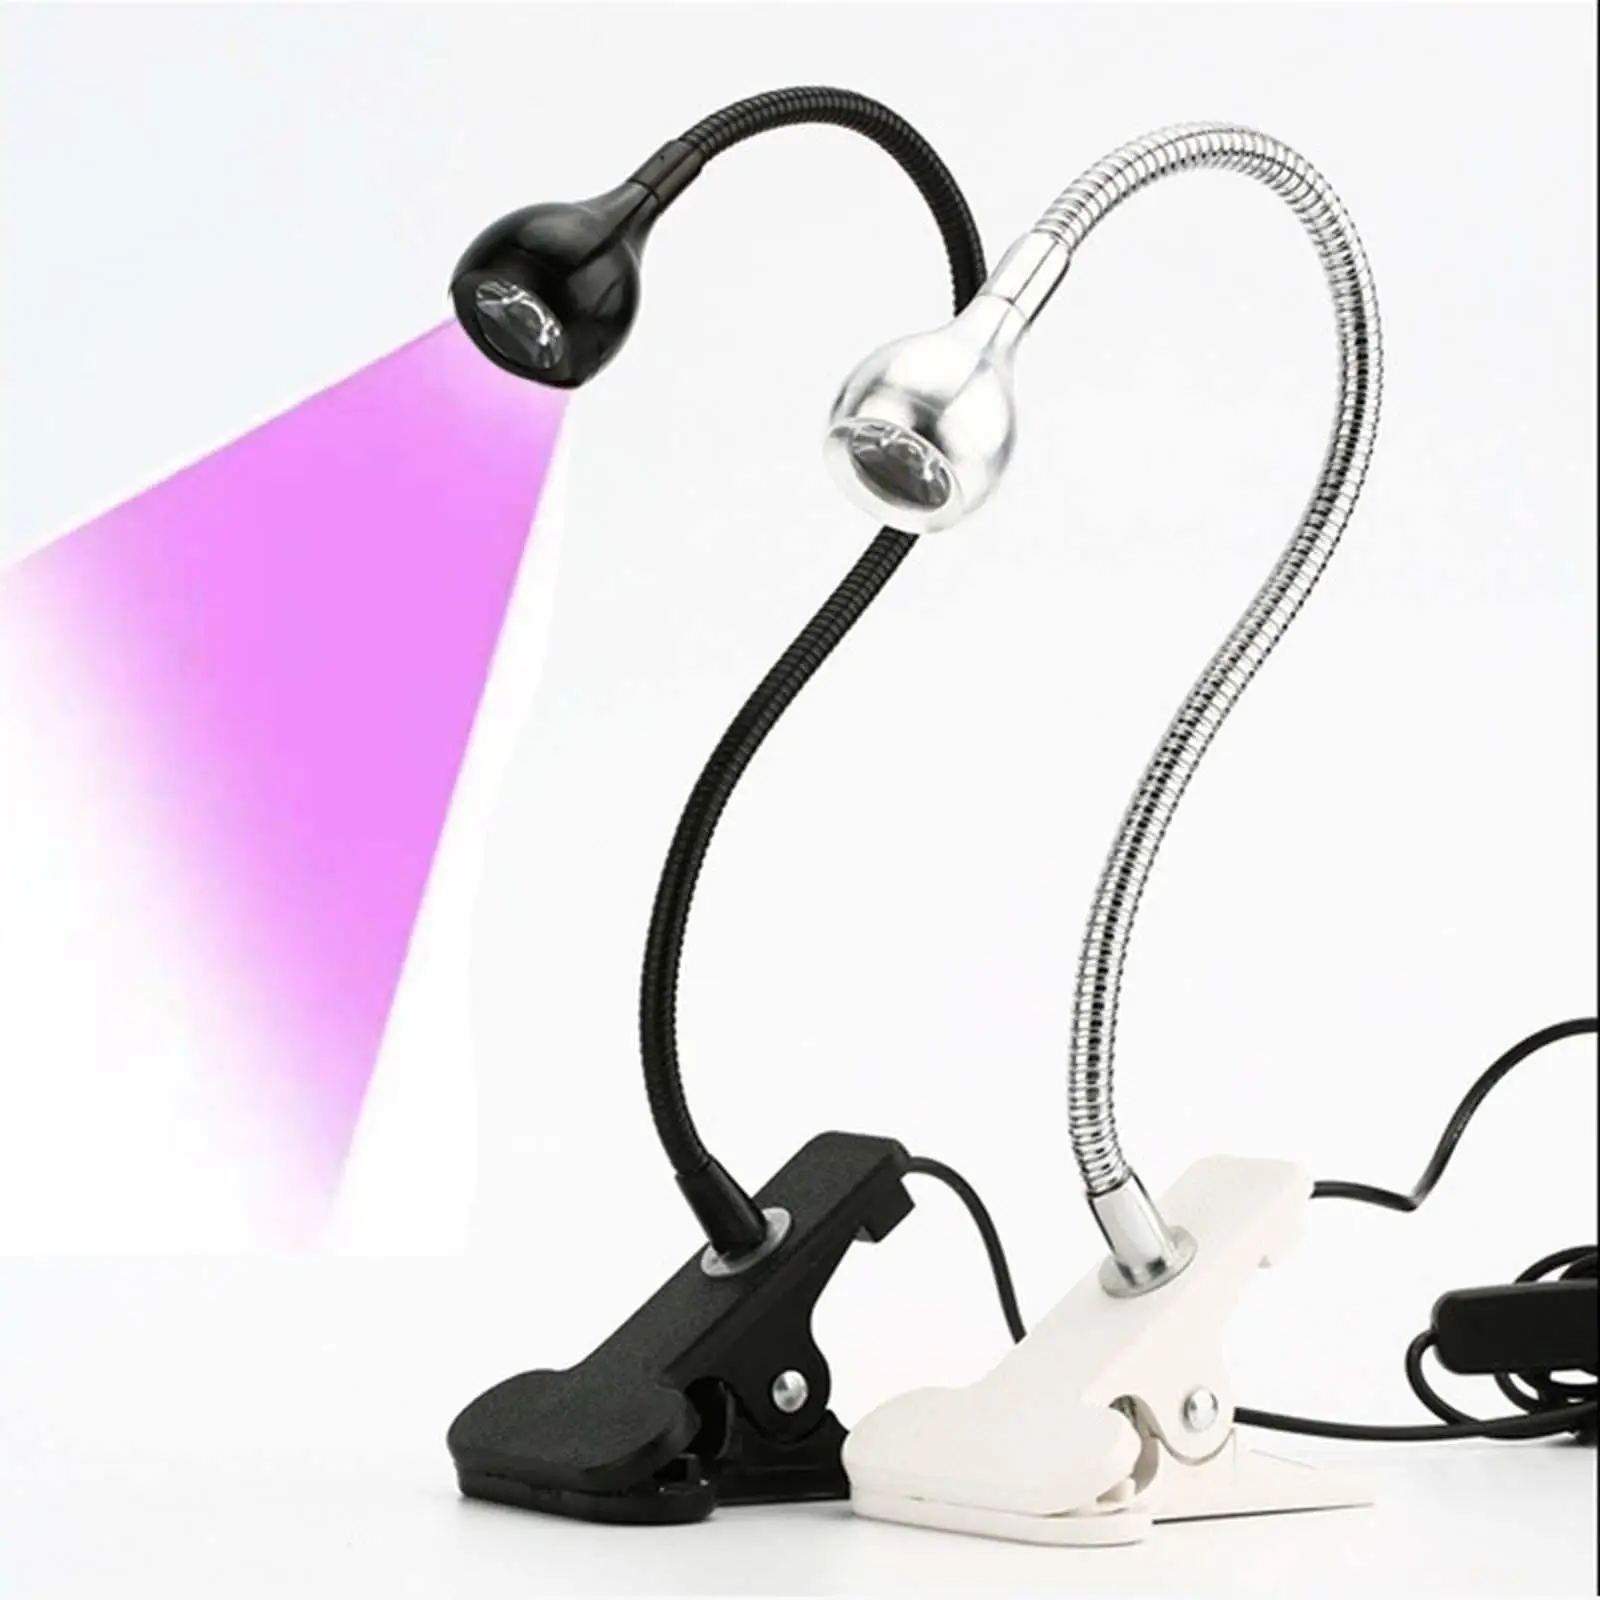 UV Curing Light with Fixtures Flexible Gooseneck Nail Lamp Dryer Light for Manicure Resin Art